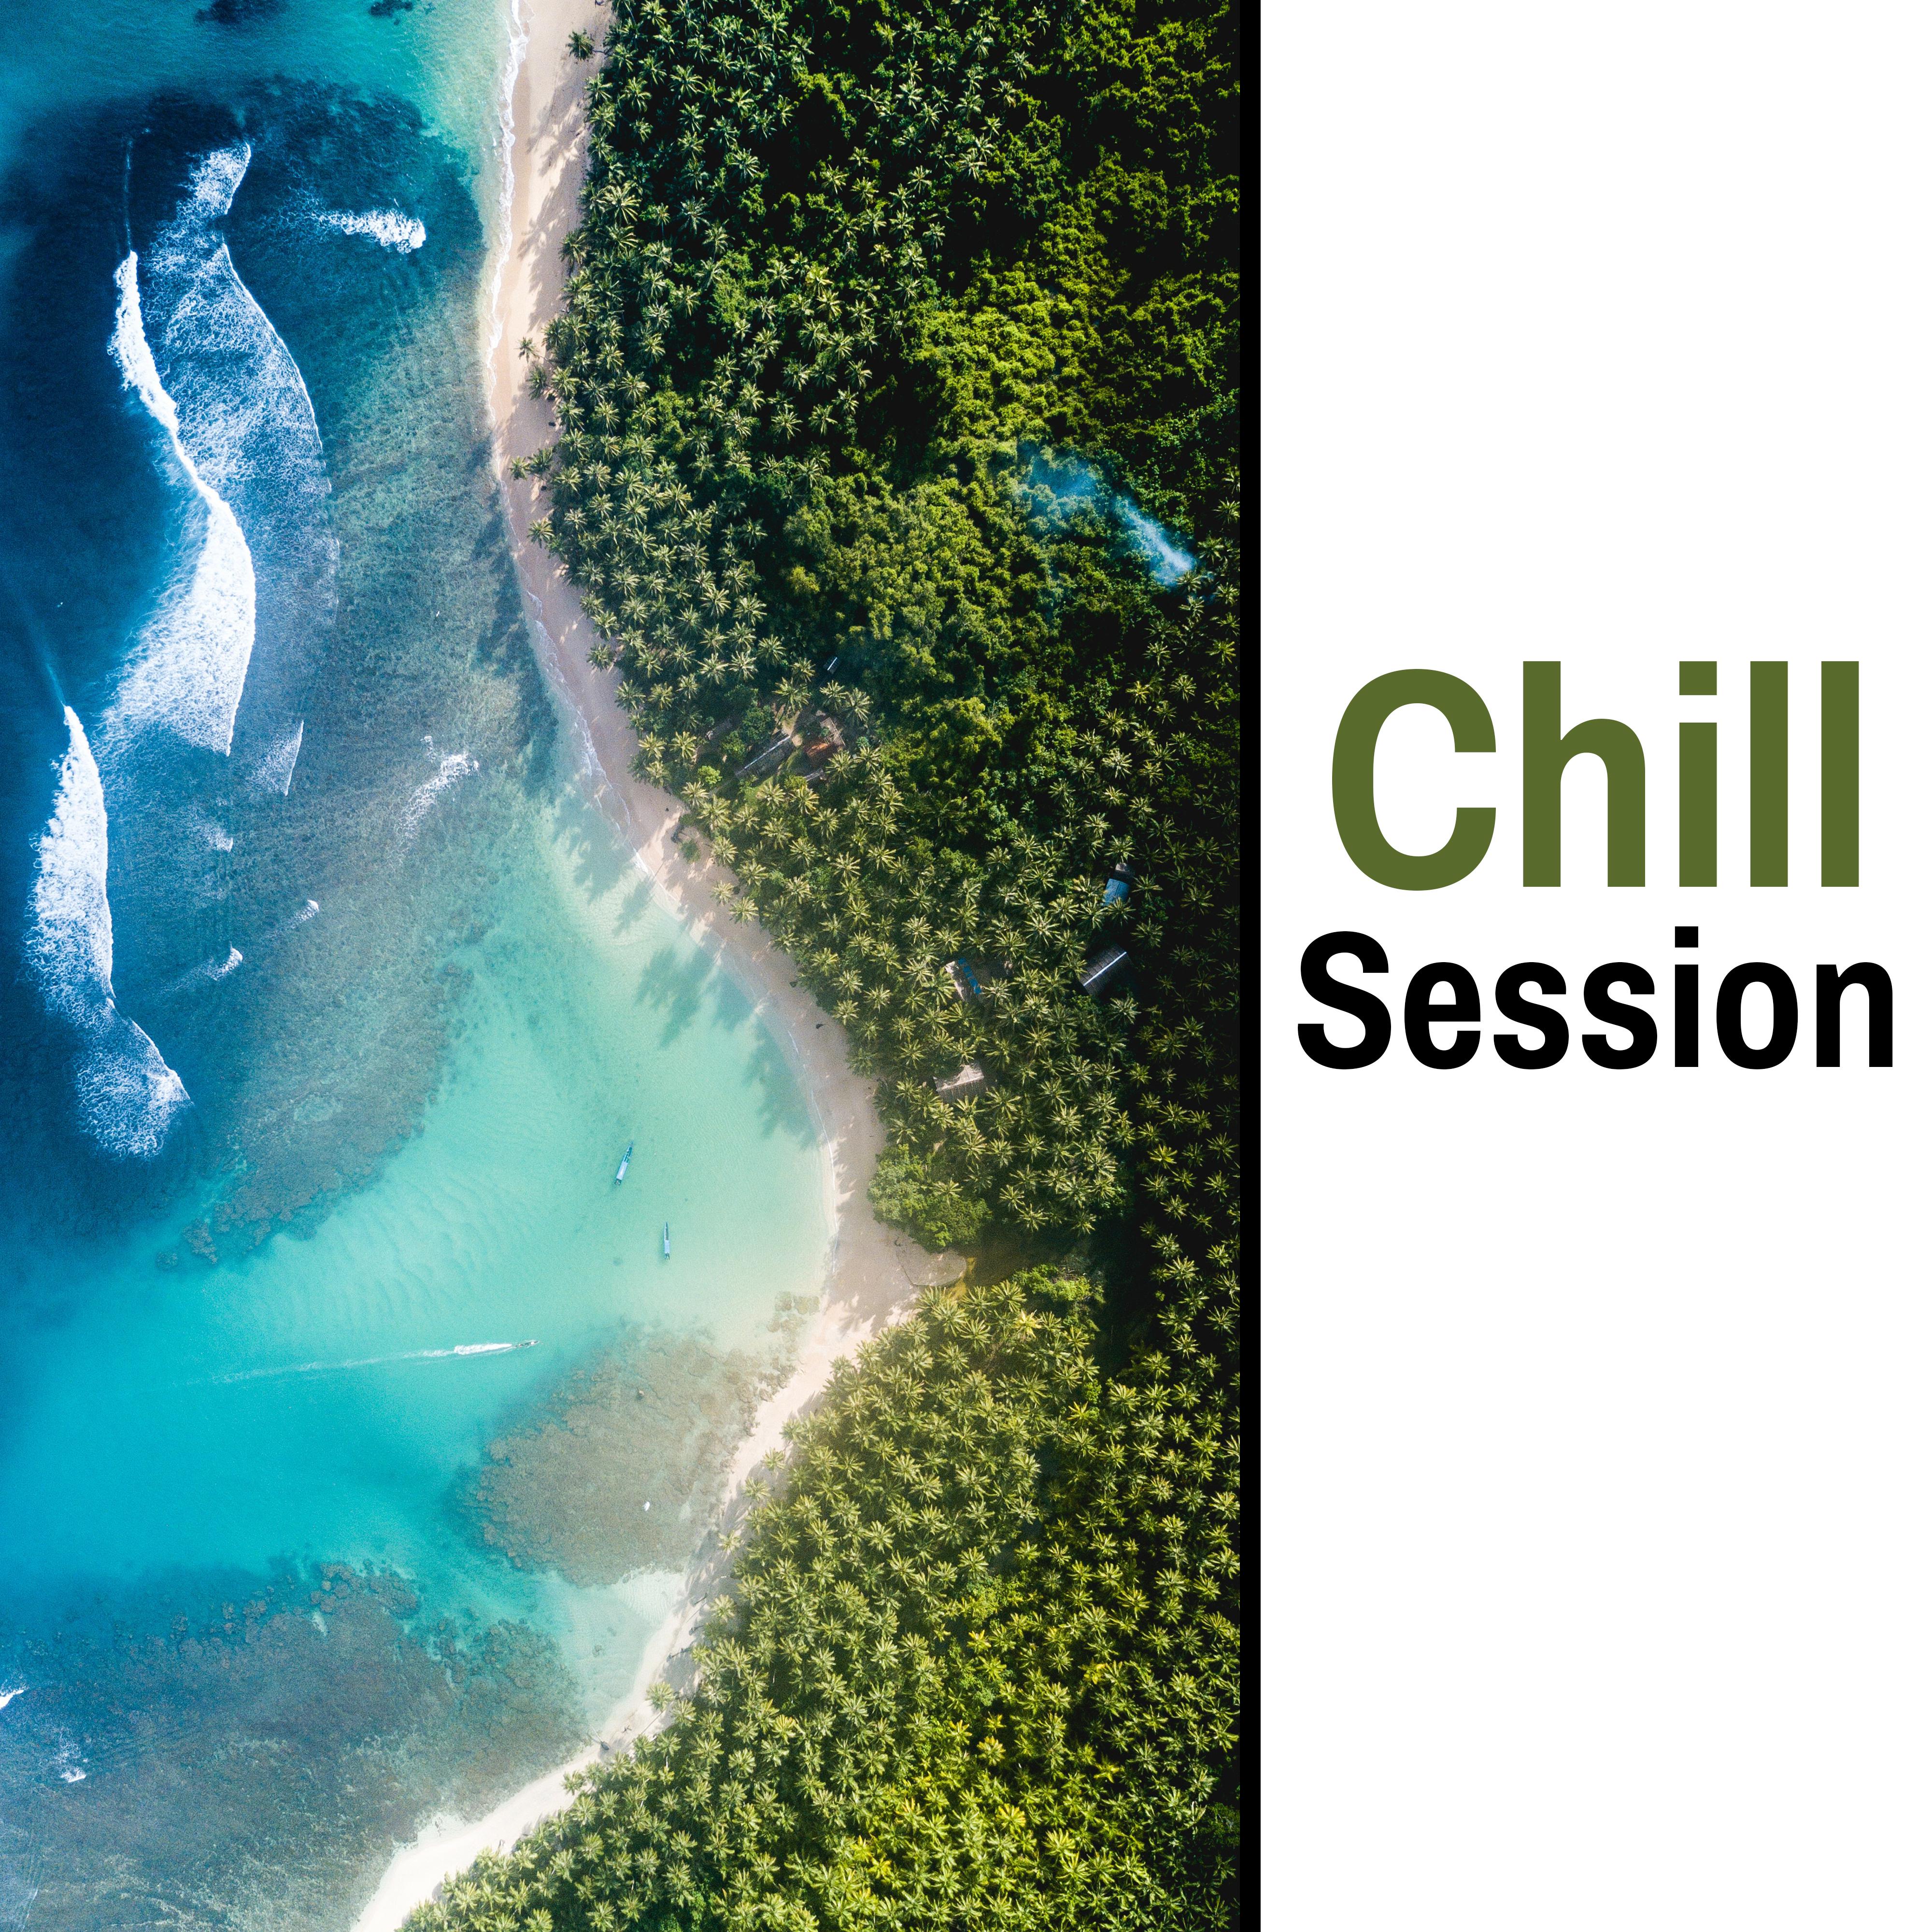 Chill Session – Soft Chill Out Music, Electronic Vibes, Soothing Sounds, Easy Listening, Beach Lounge